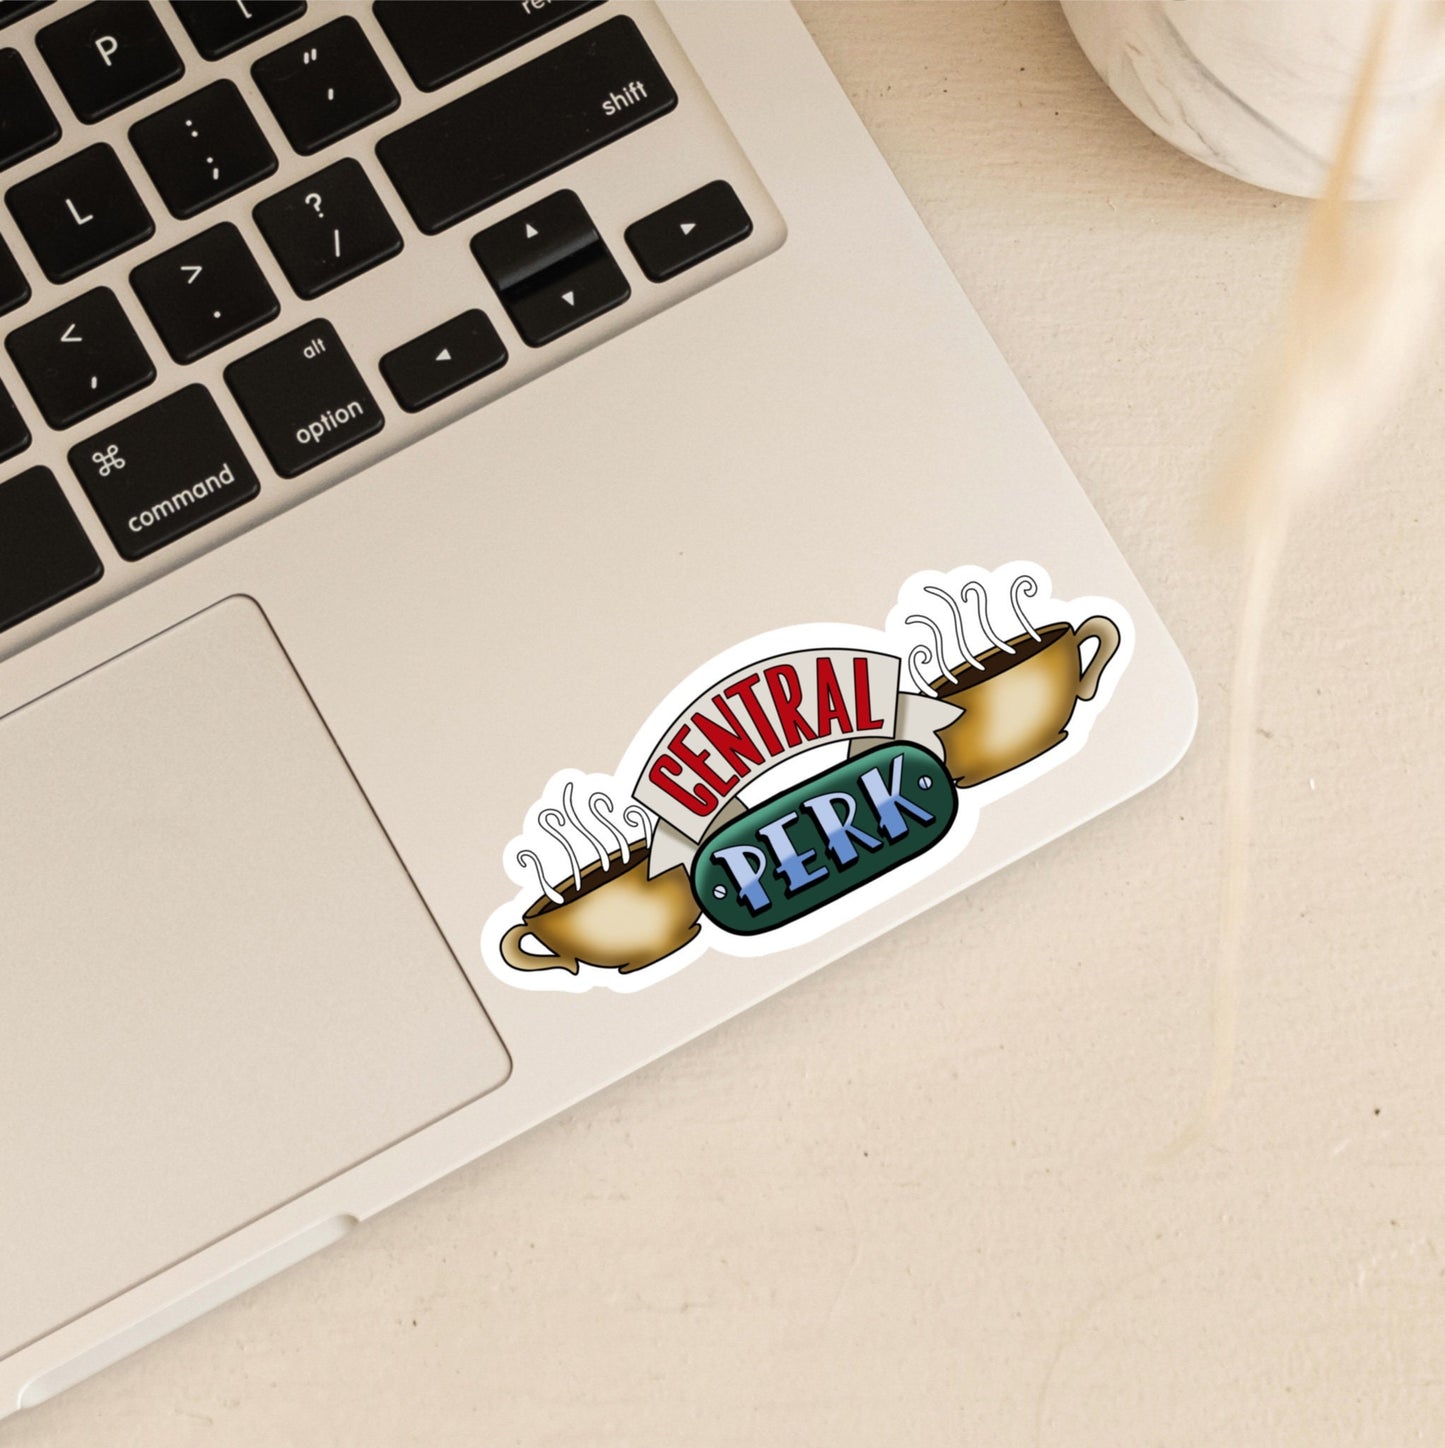 Central Perk Cafe | The One With the Friends Stickers | Friends Stickers